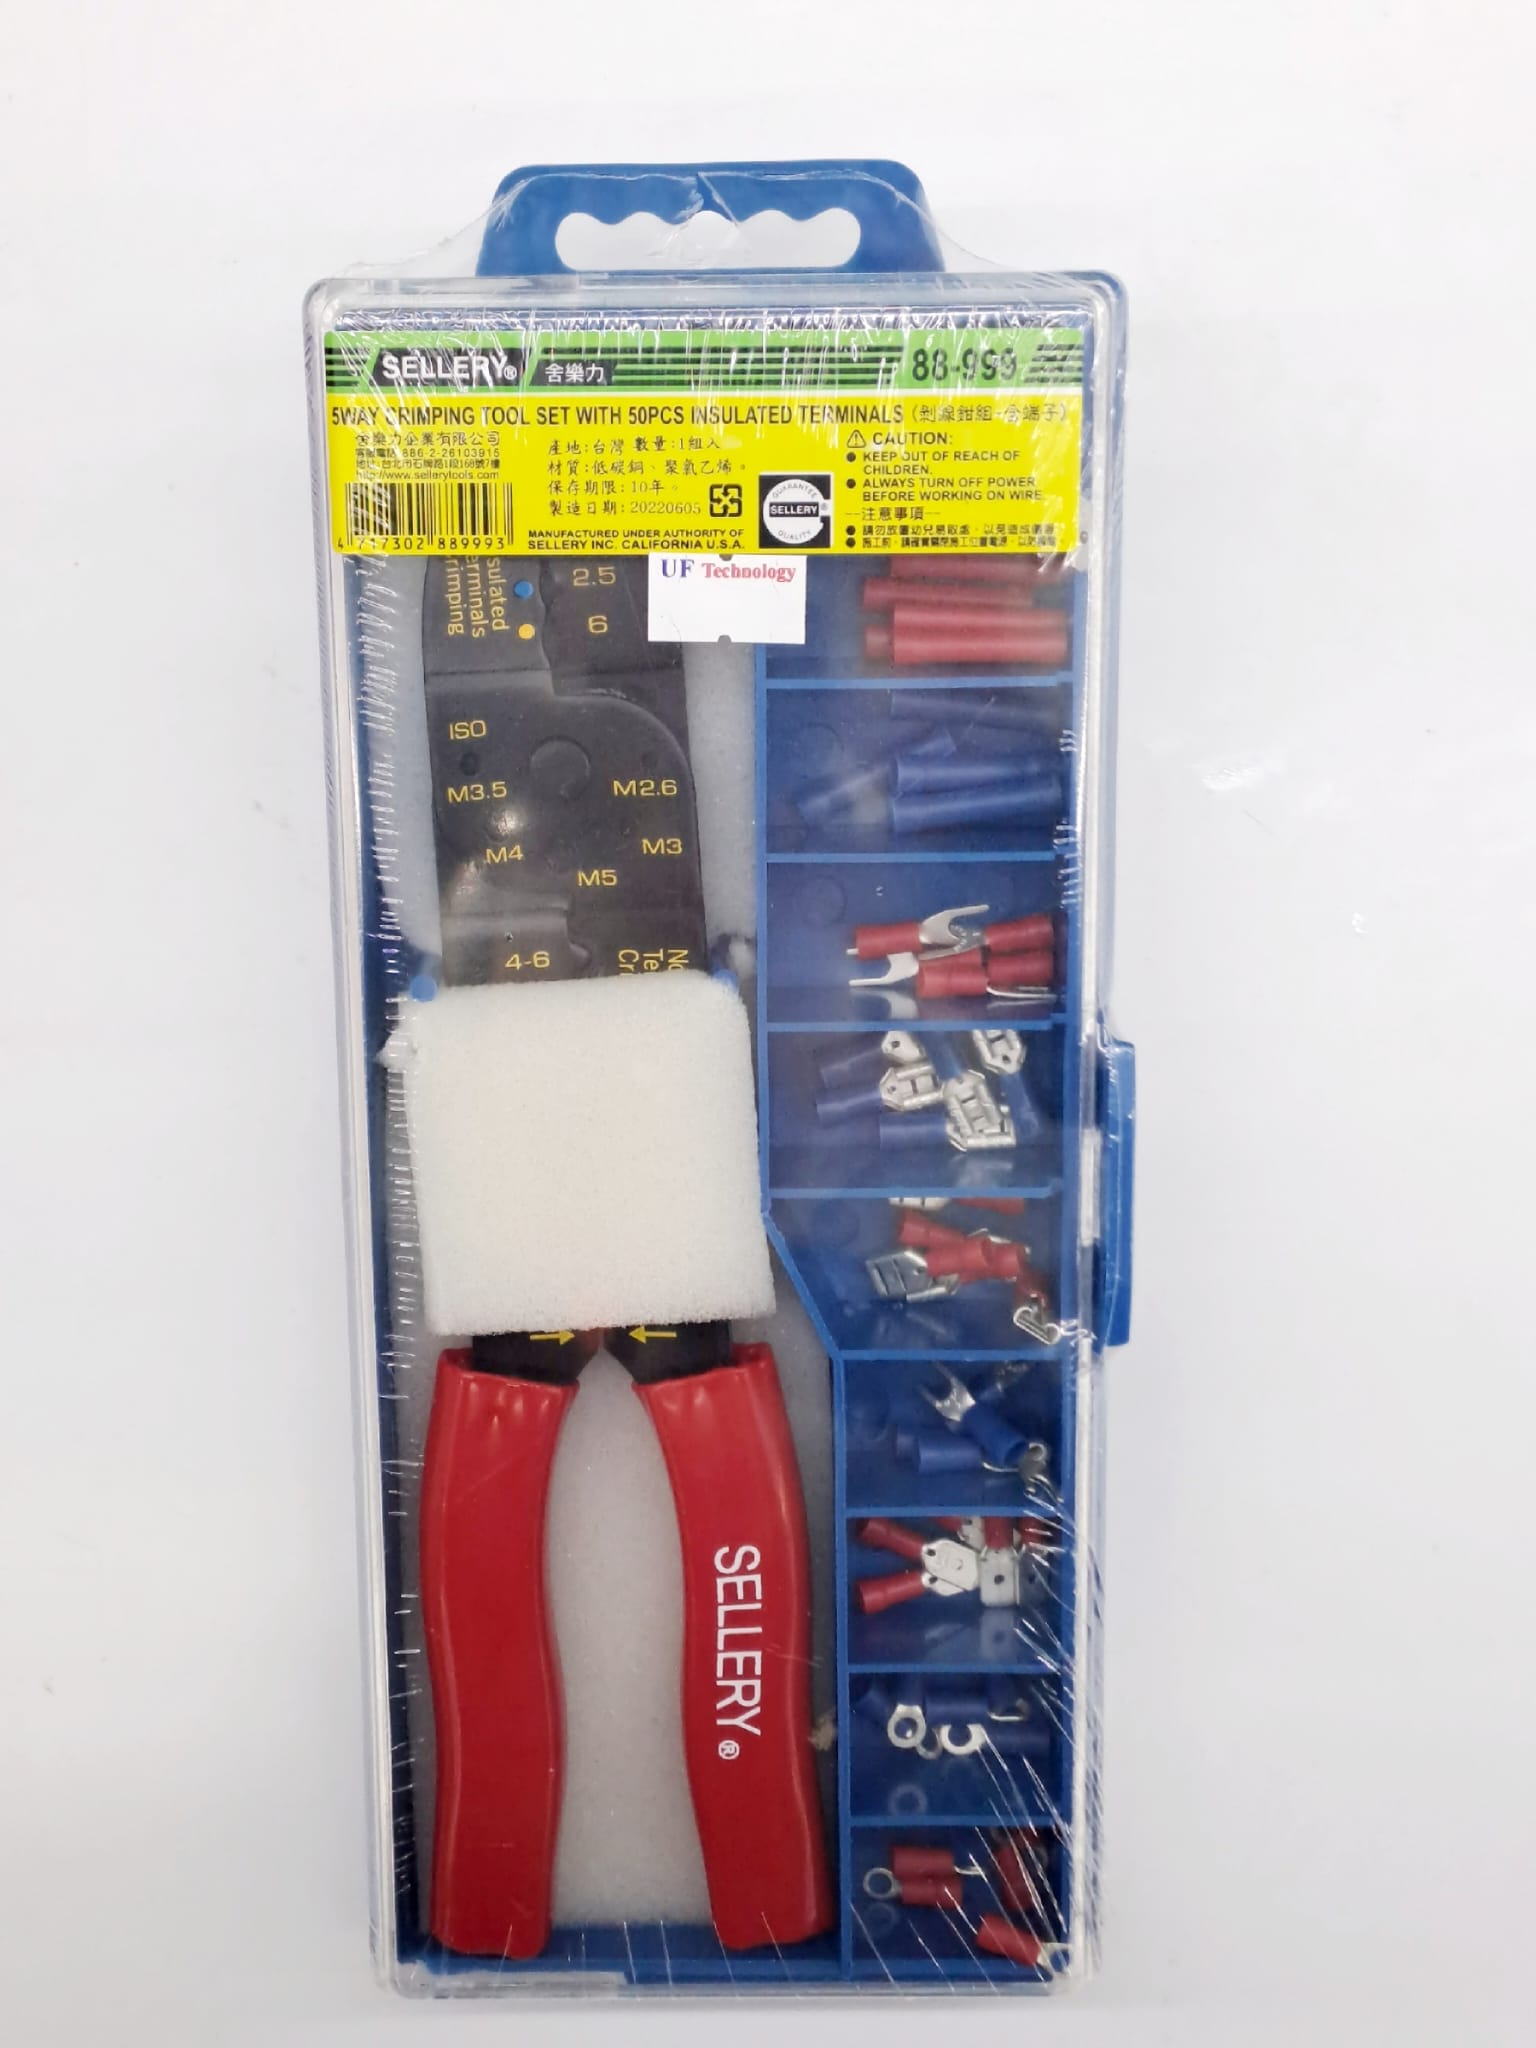 Sellery 88-999 5 Way Crimping Tool Set with 50pcs Insulated Terminals